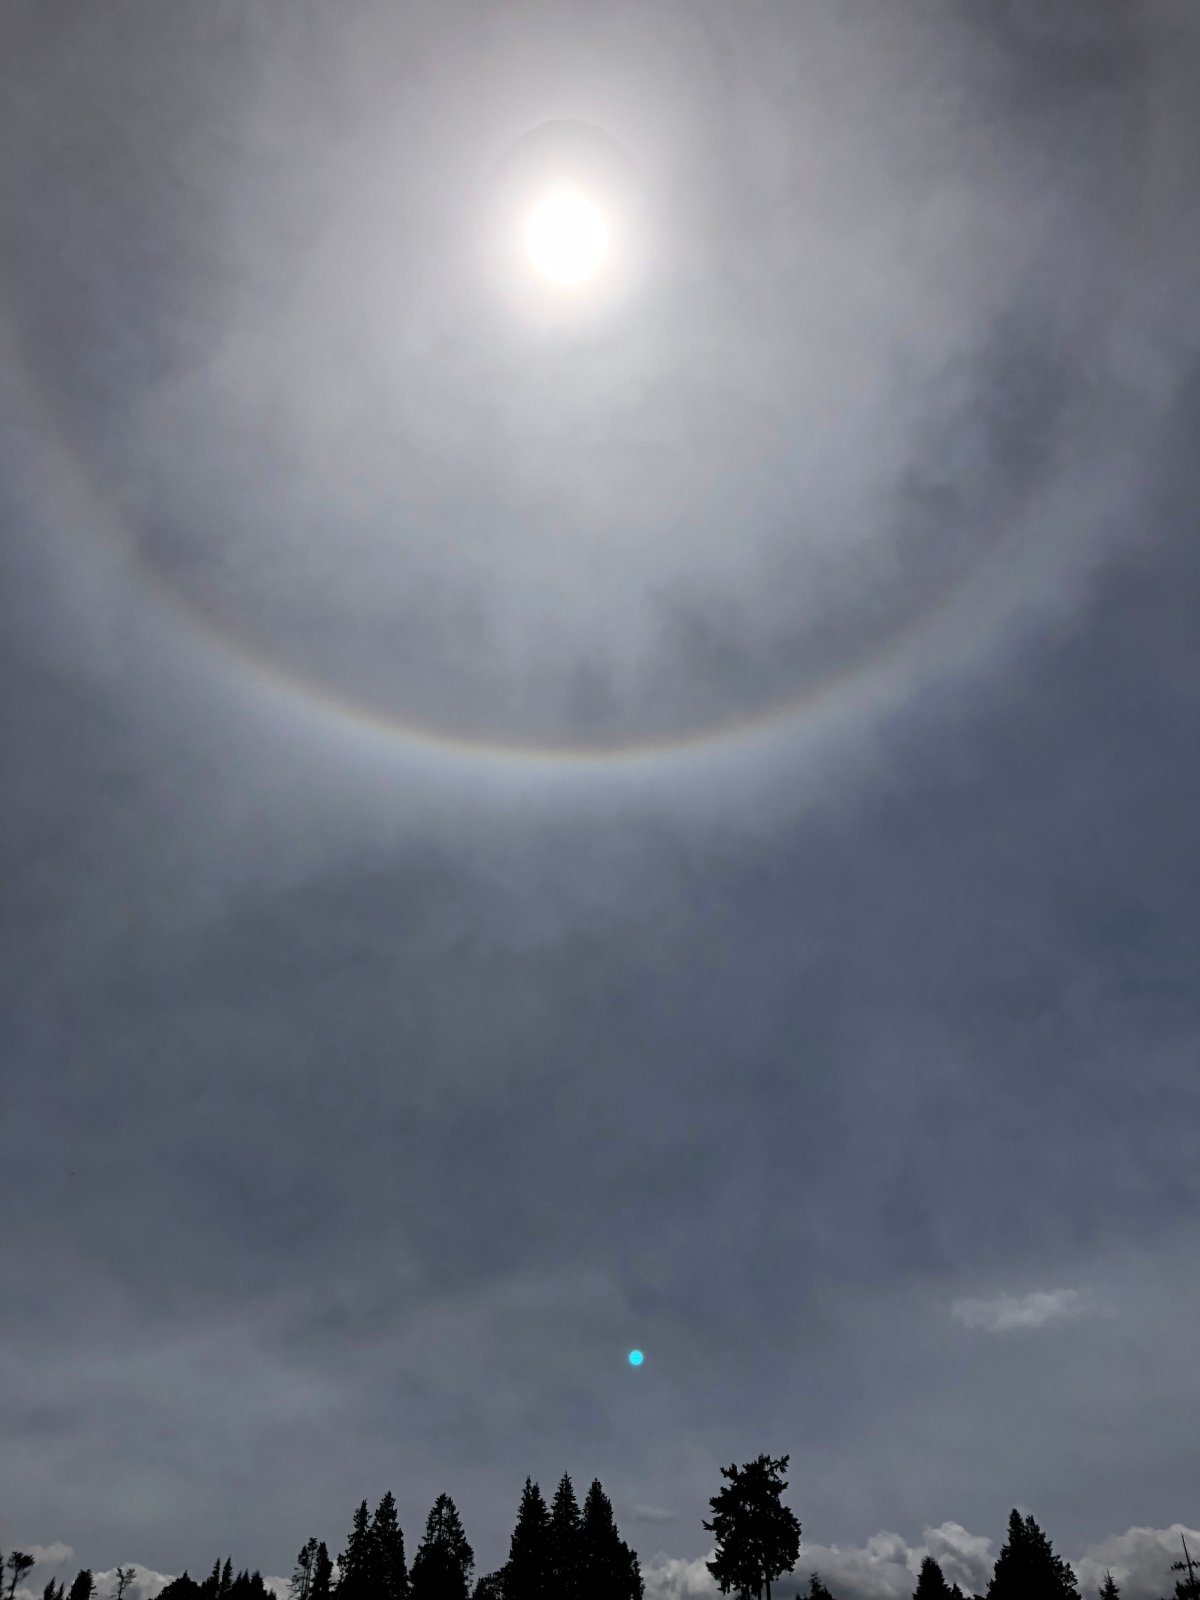 Halo meaning sun Halo Definition